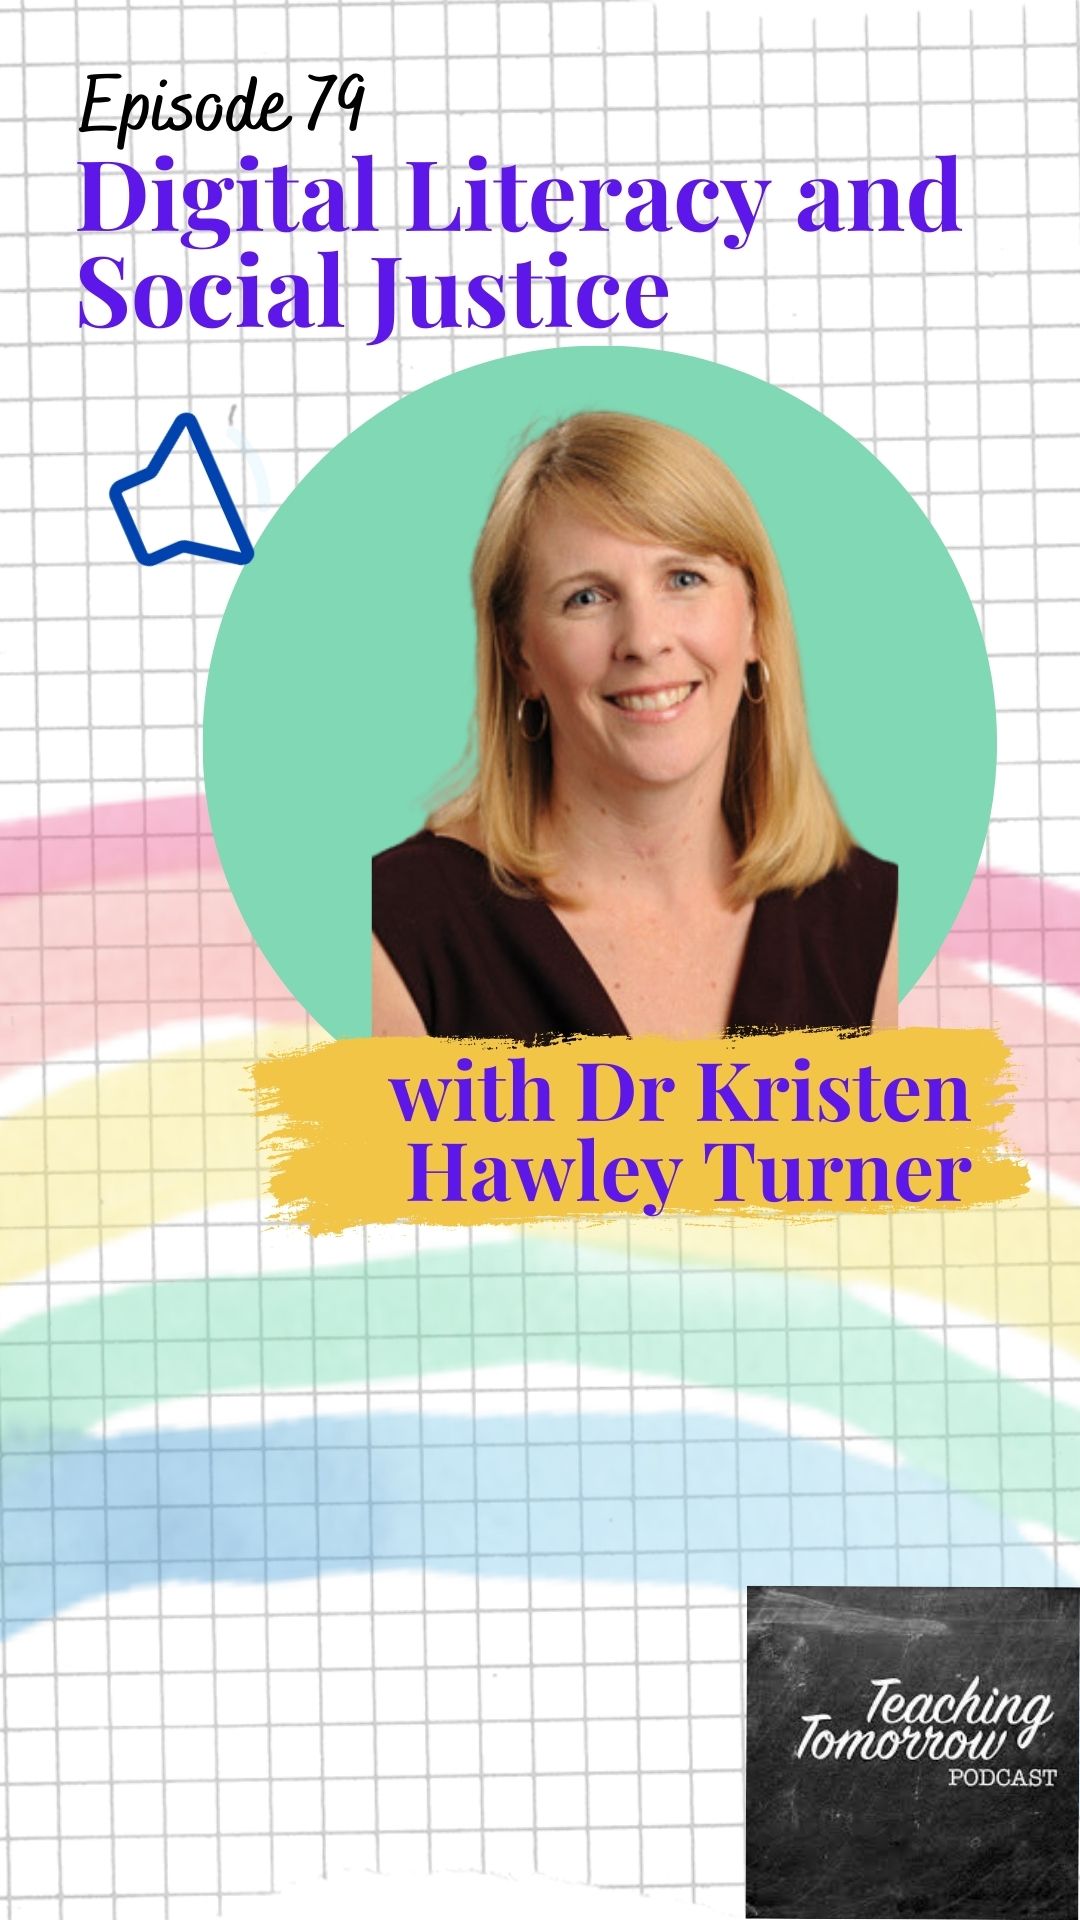 79. Digital literacy and social justice with Dr. Kristen Hawley Turner